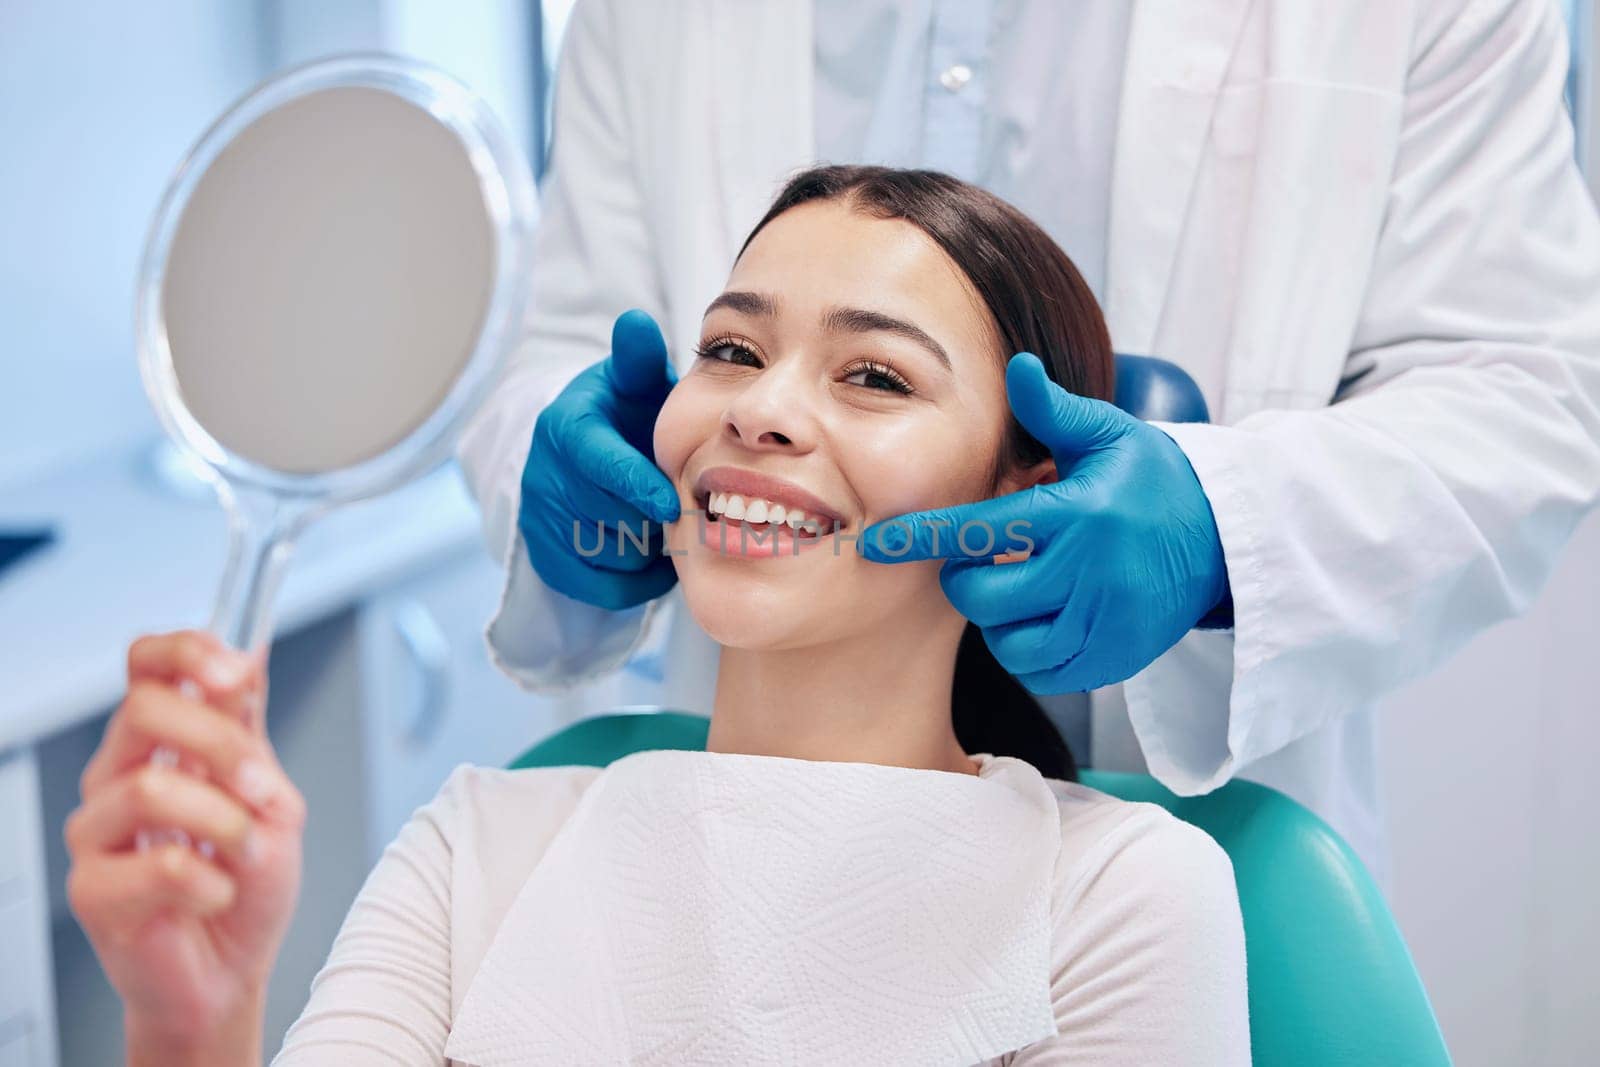 Dentist, mirror and portrait of woman with smile after teeth whitening, service and dental care. Healthcare, dentistry and female patient with orthodontist for oral hygiene, wellness and cleaning.